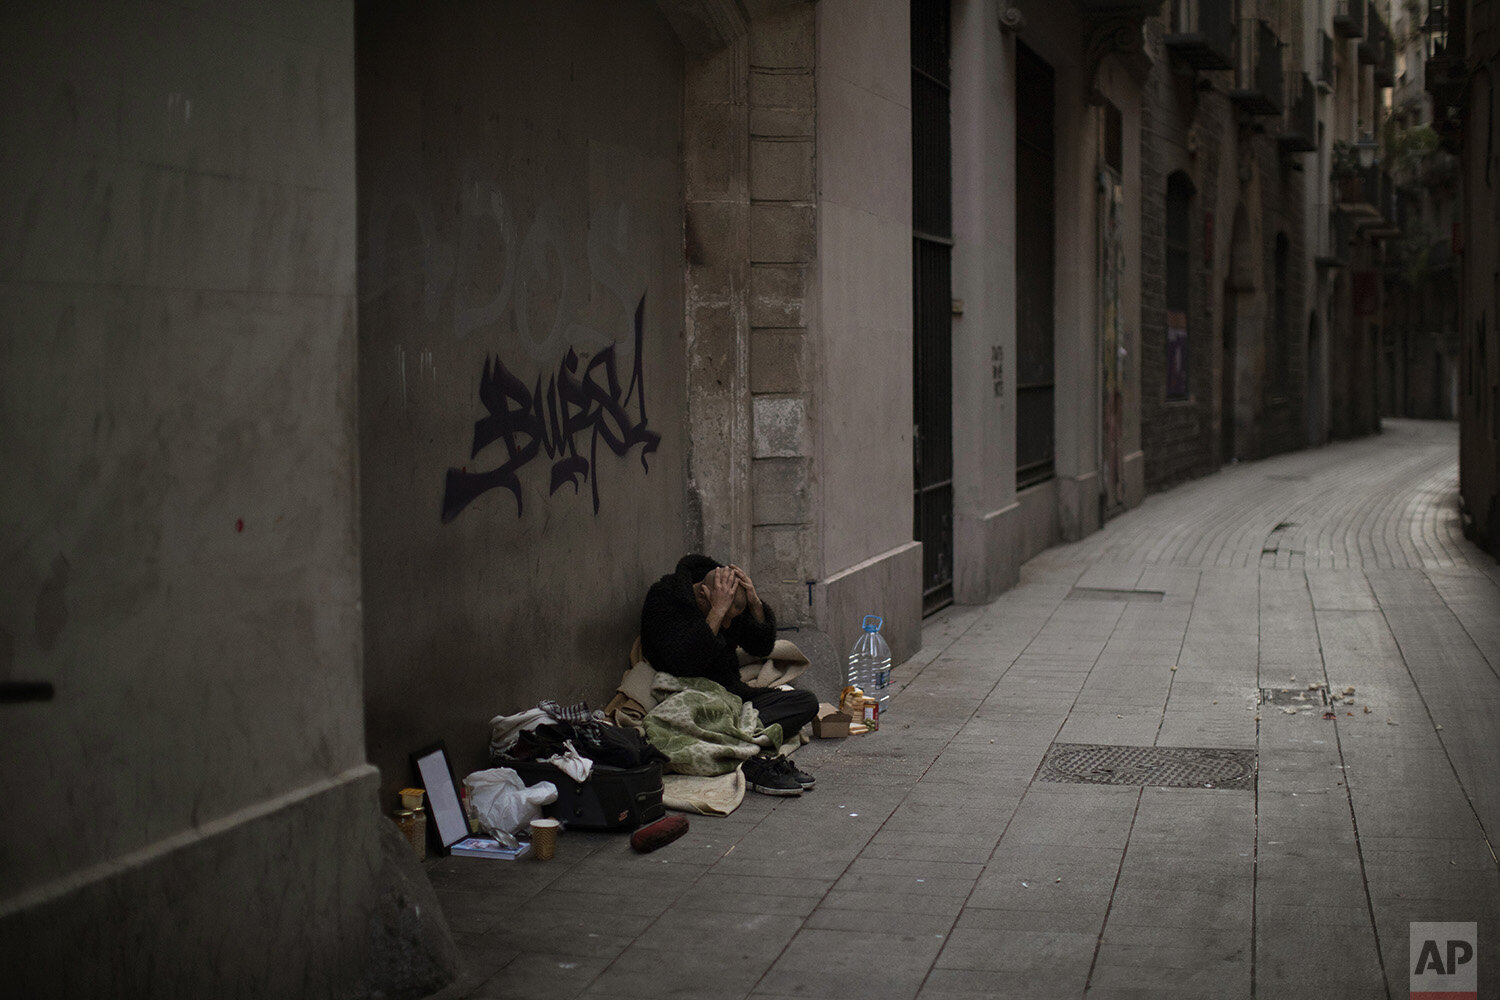  In this Saturday, March 21, 2020, Javier Redondo, 40, covers his head with his hands as he waits for alms on an empty street of Barcelona, Spain. While authorities are telling people to stay at home amid the COVID-19 outbreak, others as Javier are h